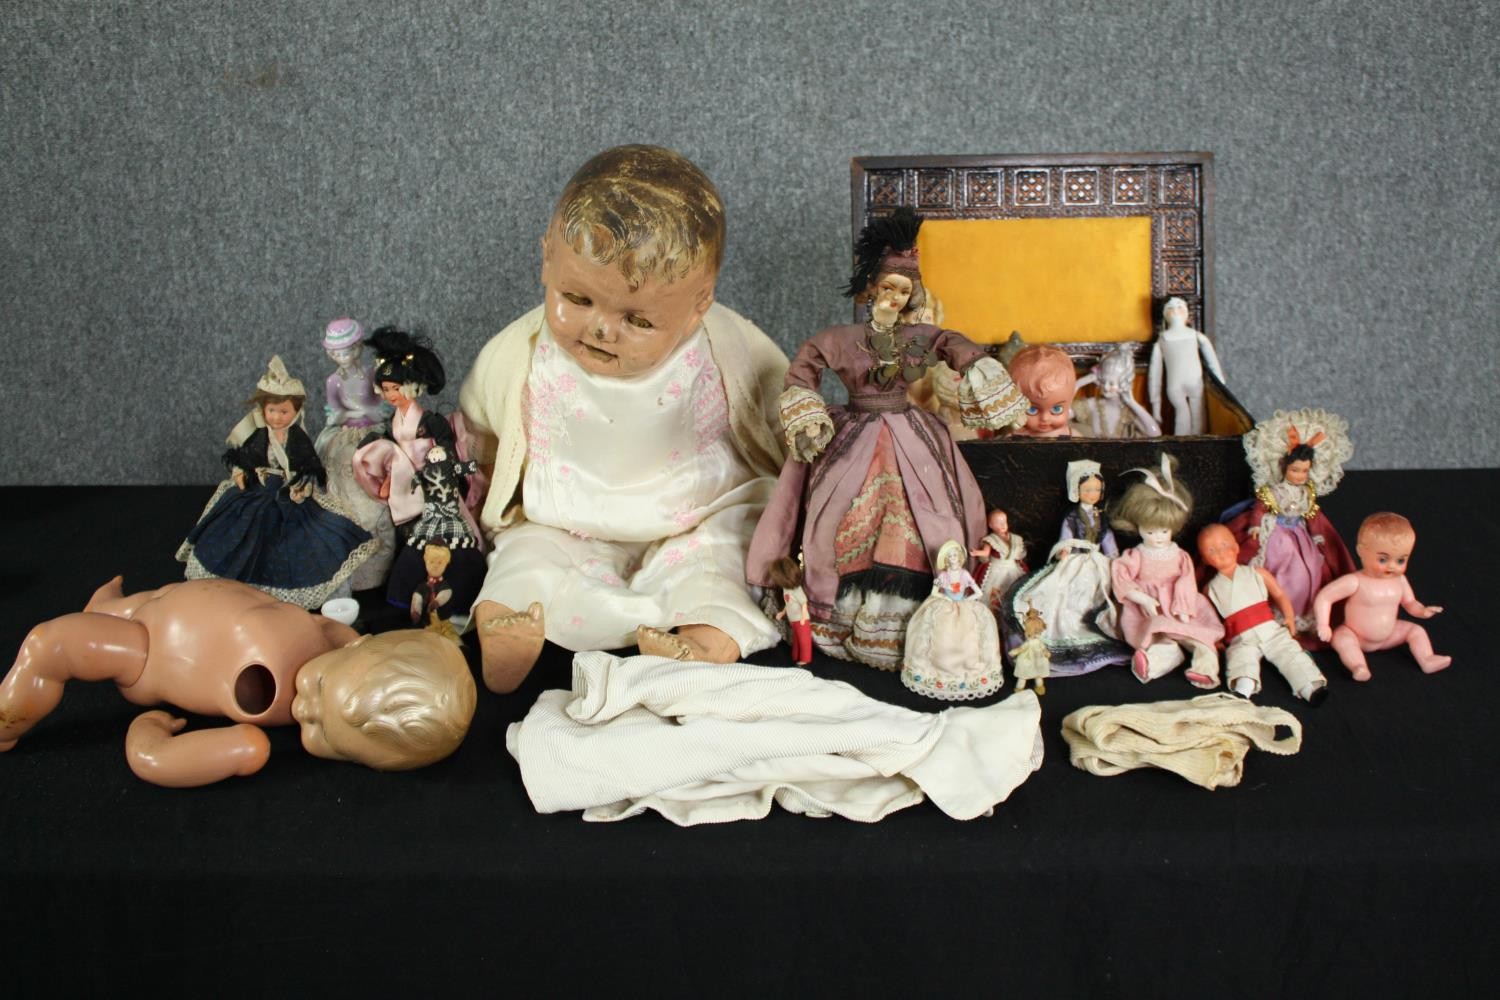 A collection of 19th and early 20th century dolls, including an Indian doll in traditional silk